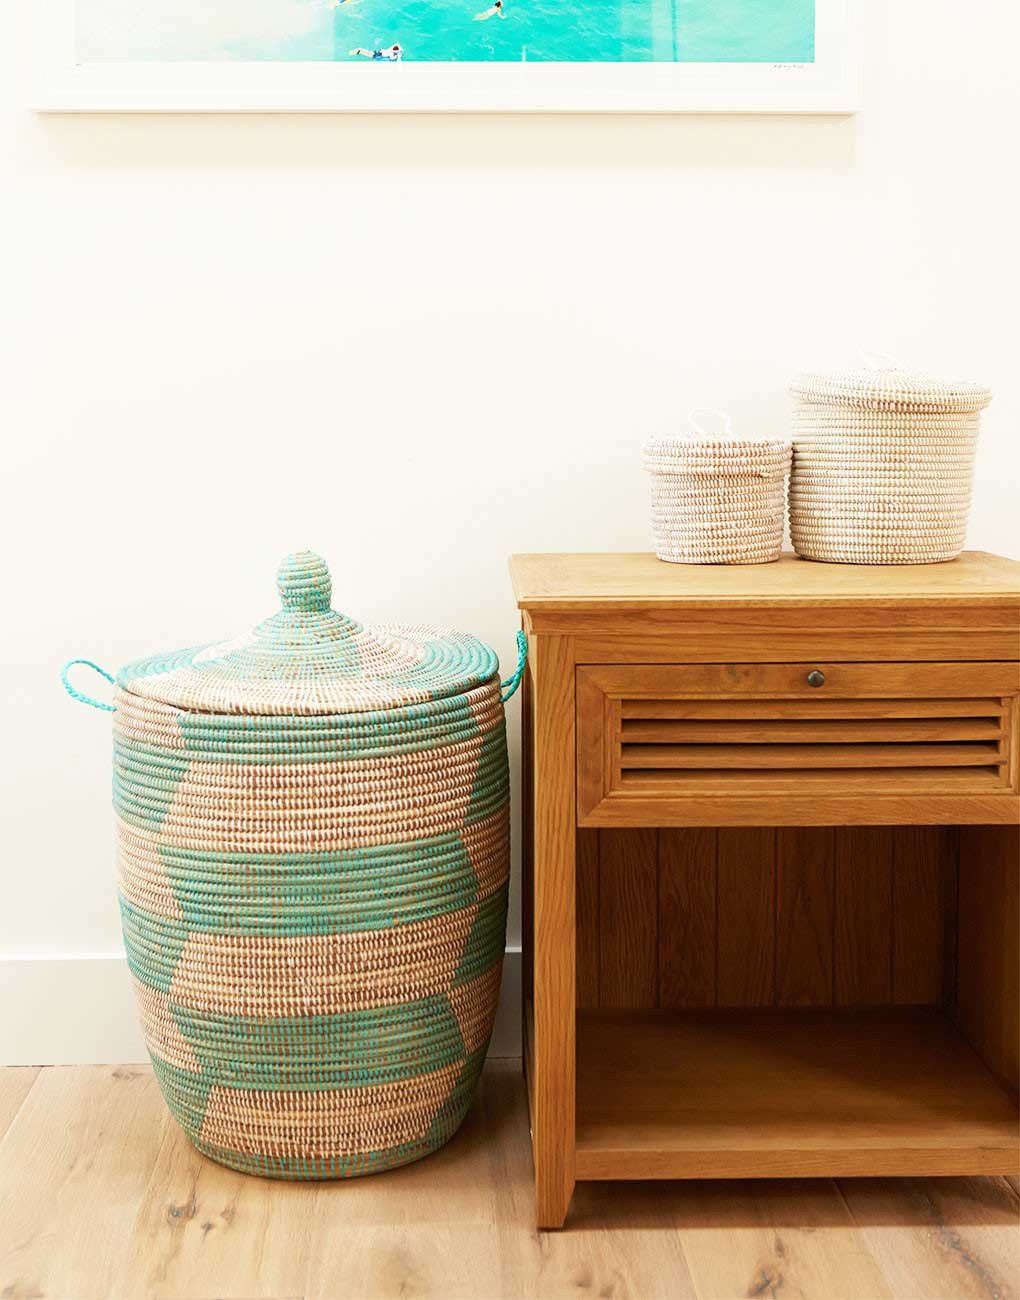 A colorful natural fiber basket from Senegal placed next to a nightstand.